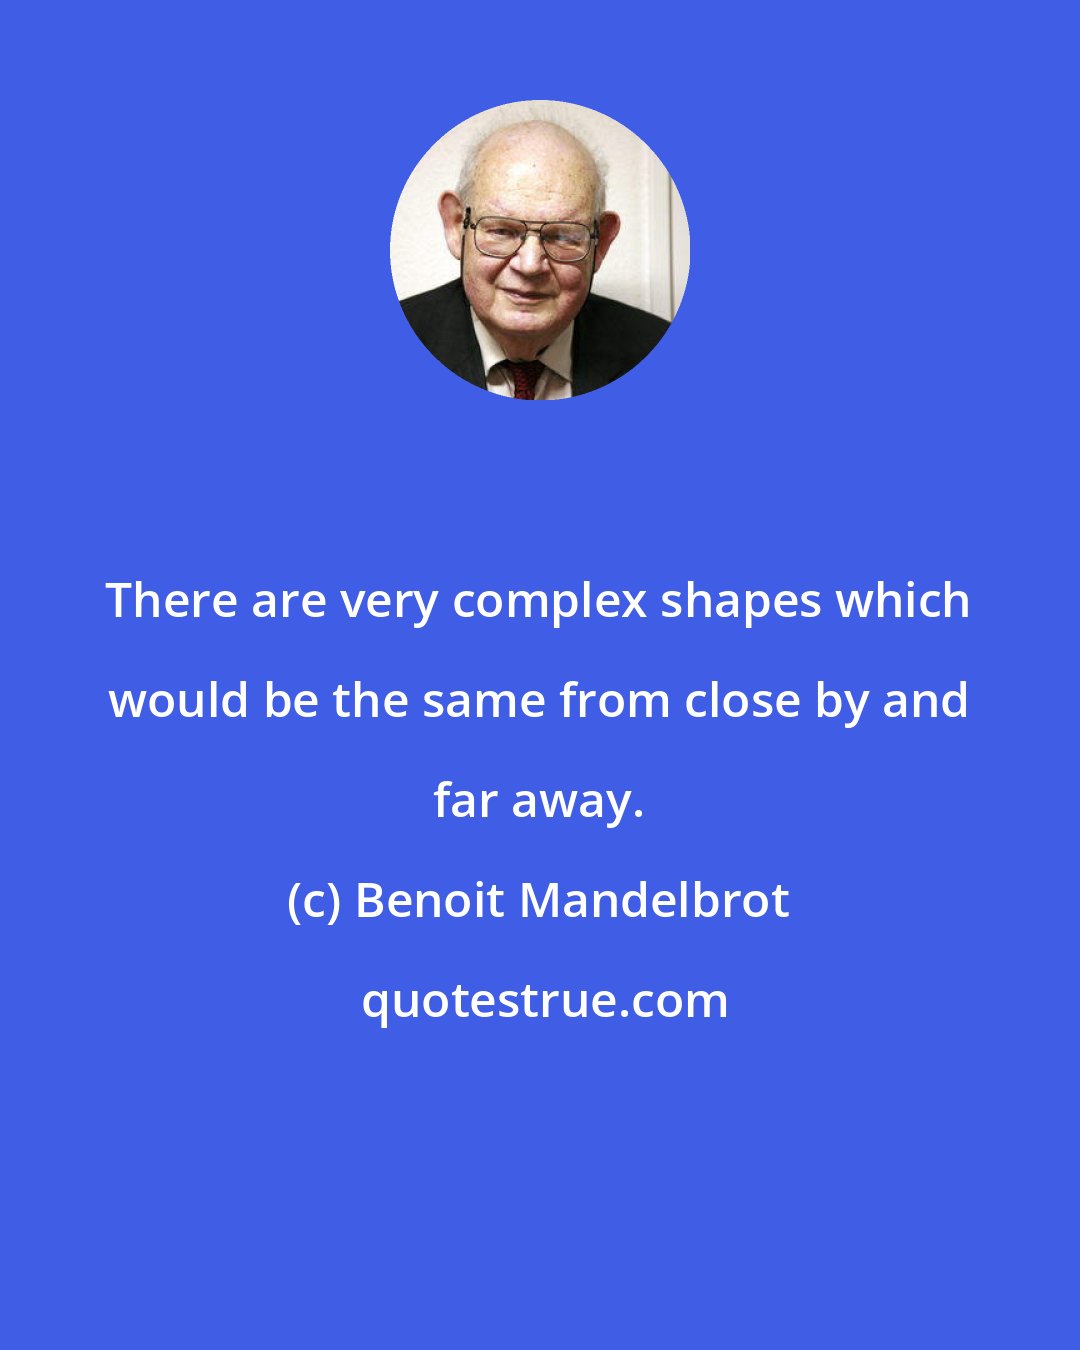 Benoit Mandelbrot: There are very complex shapes which would be the same from close by and far away.